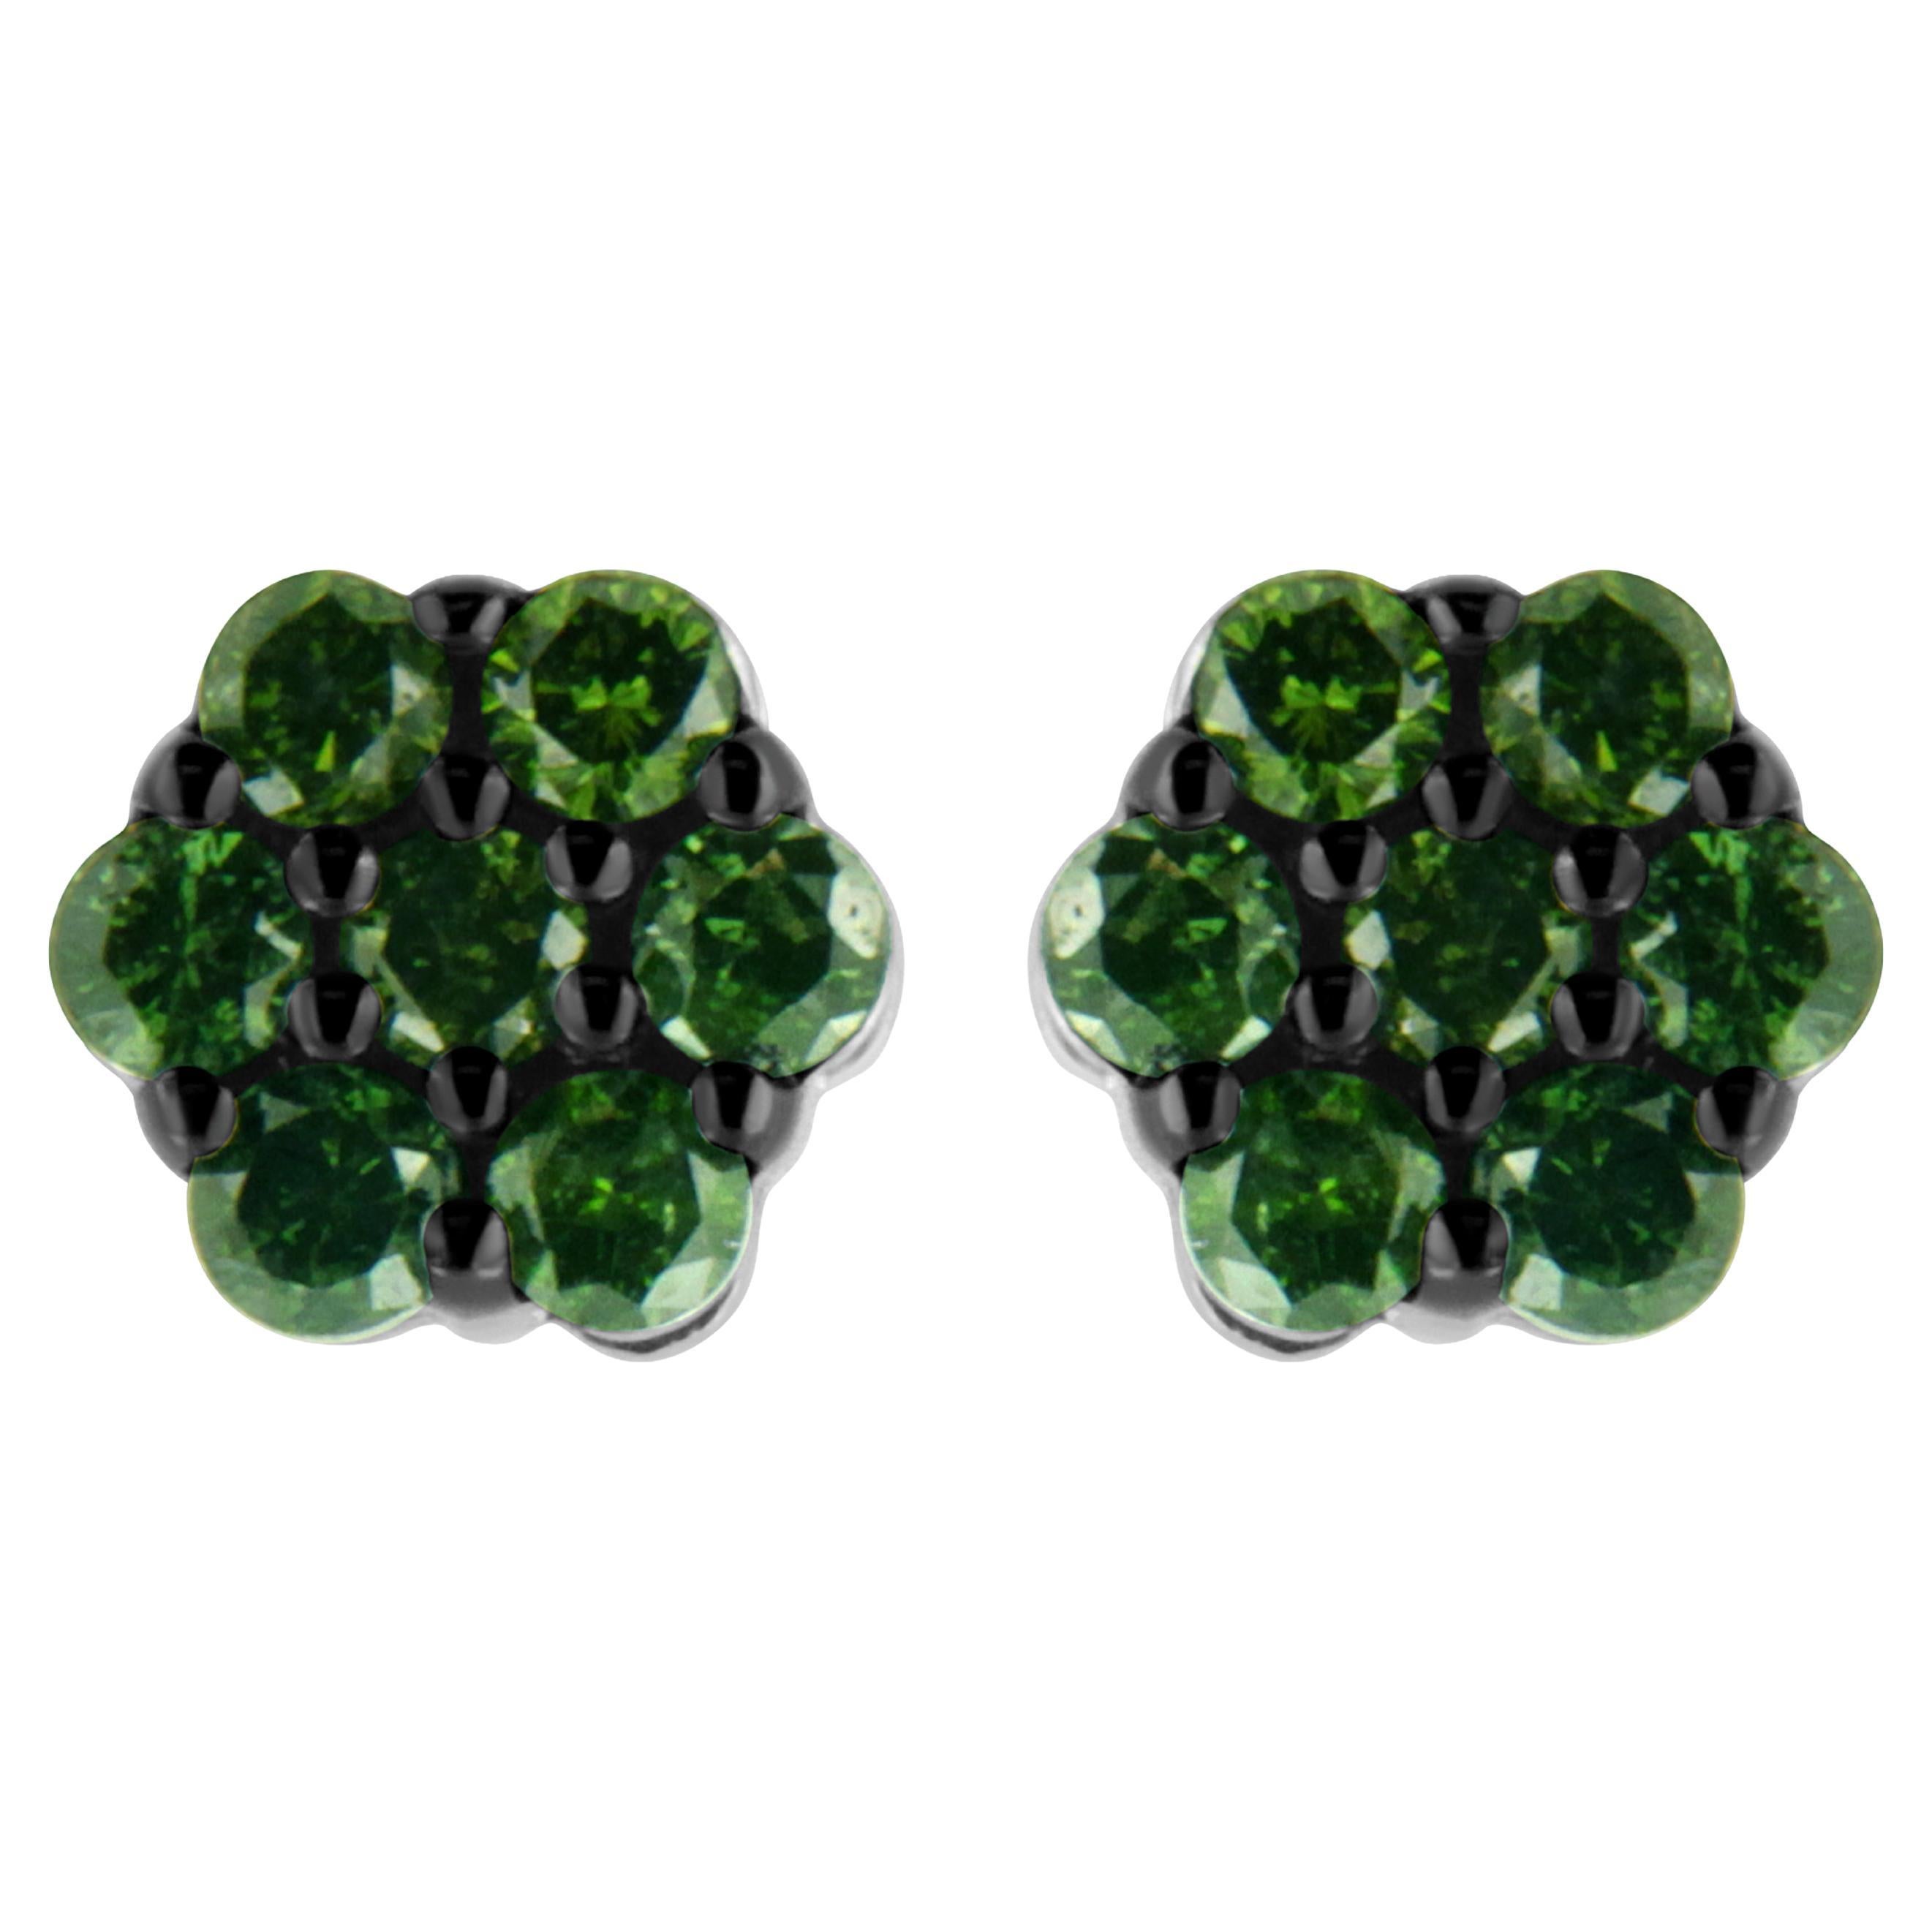 .925 Sterling Silver 4.0 Carat Treated Green Diamond Floral Cluster Stud Earring